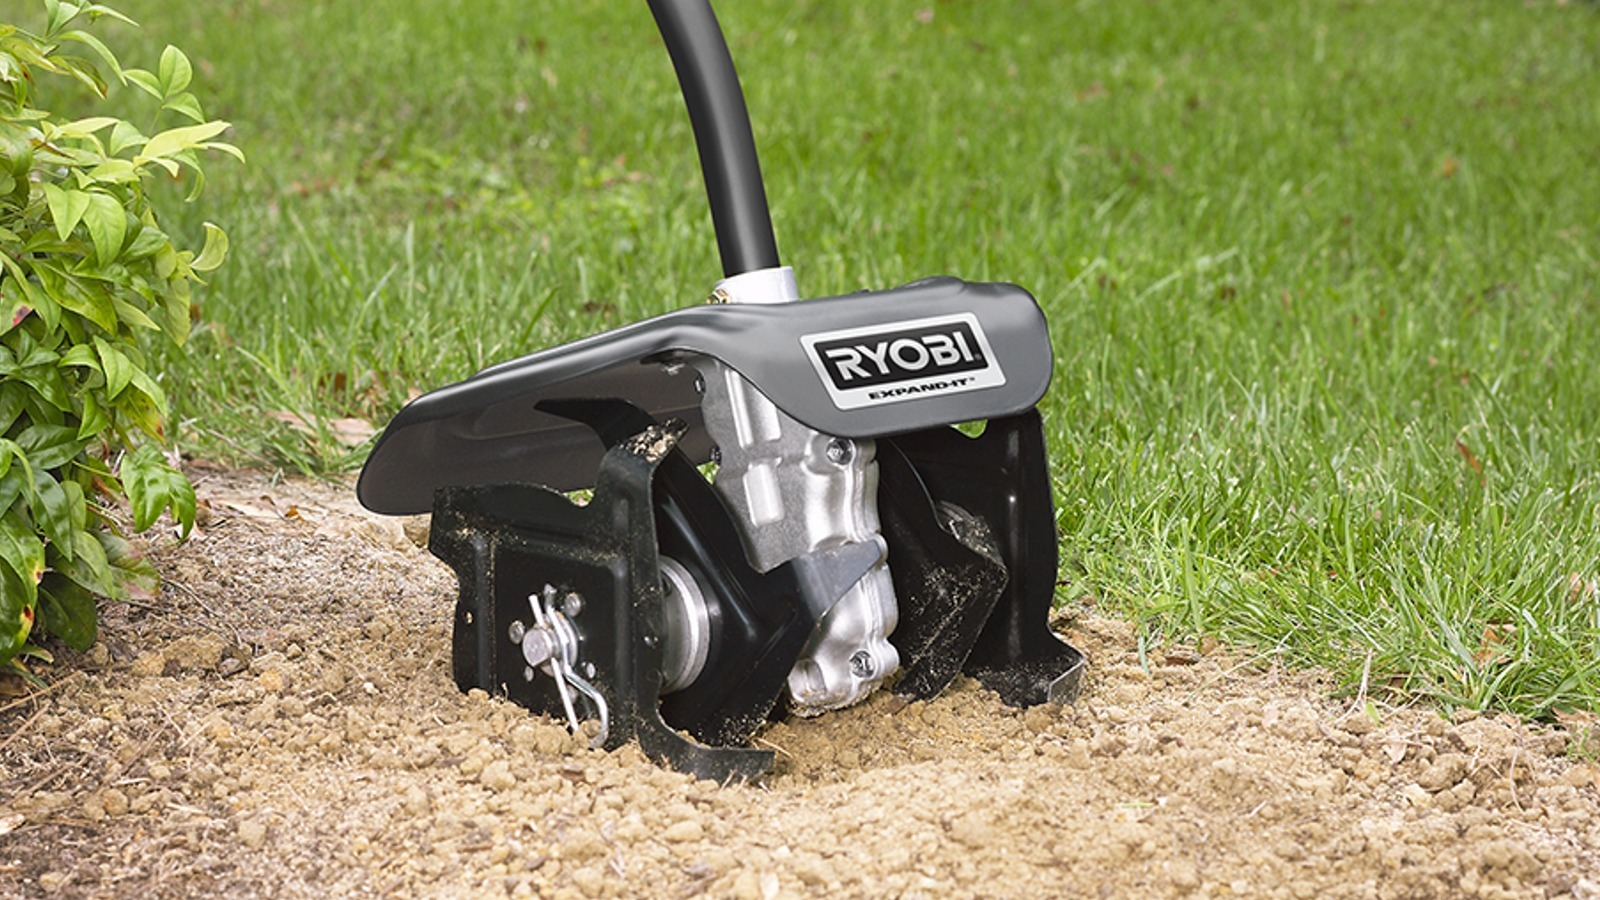 Everything You Need To Know About Ryobi's Cultivator Attachment Before You Buy